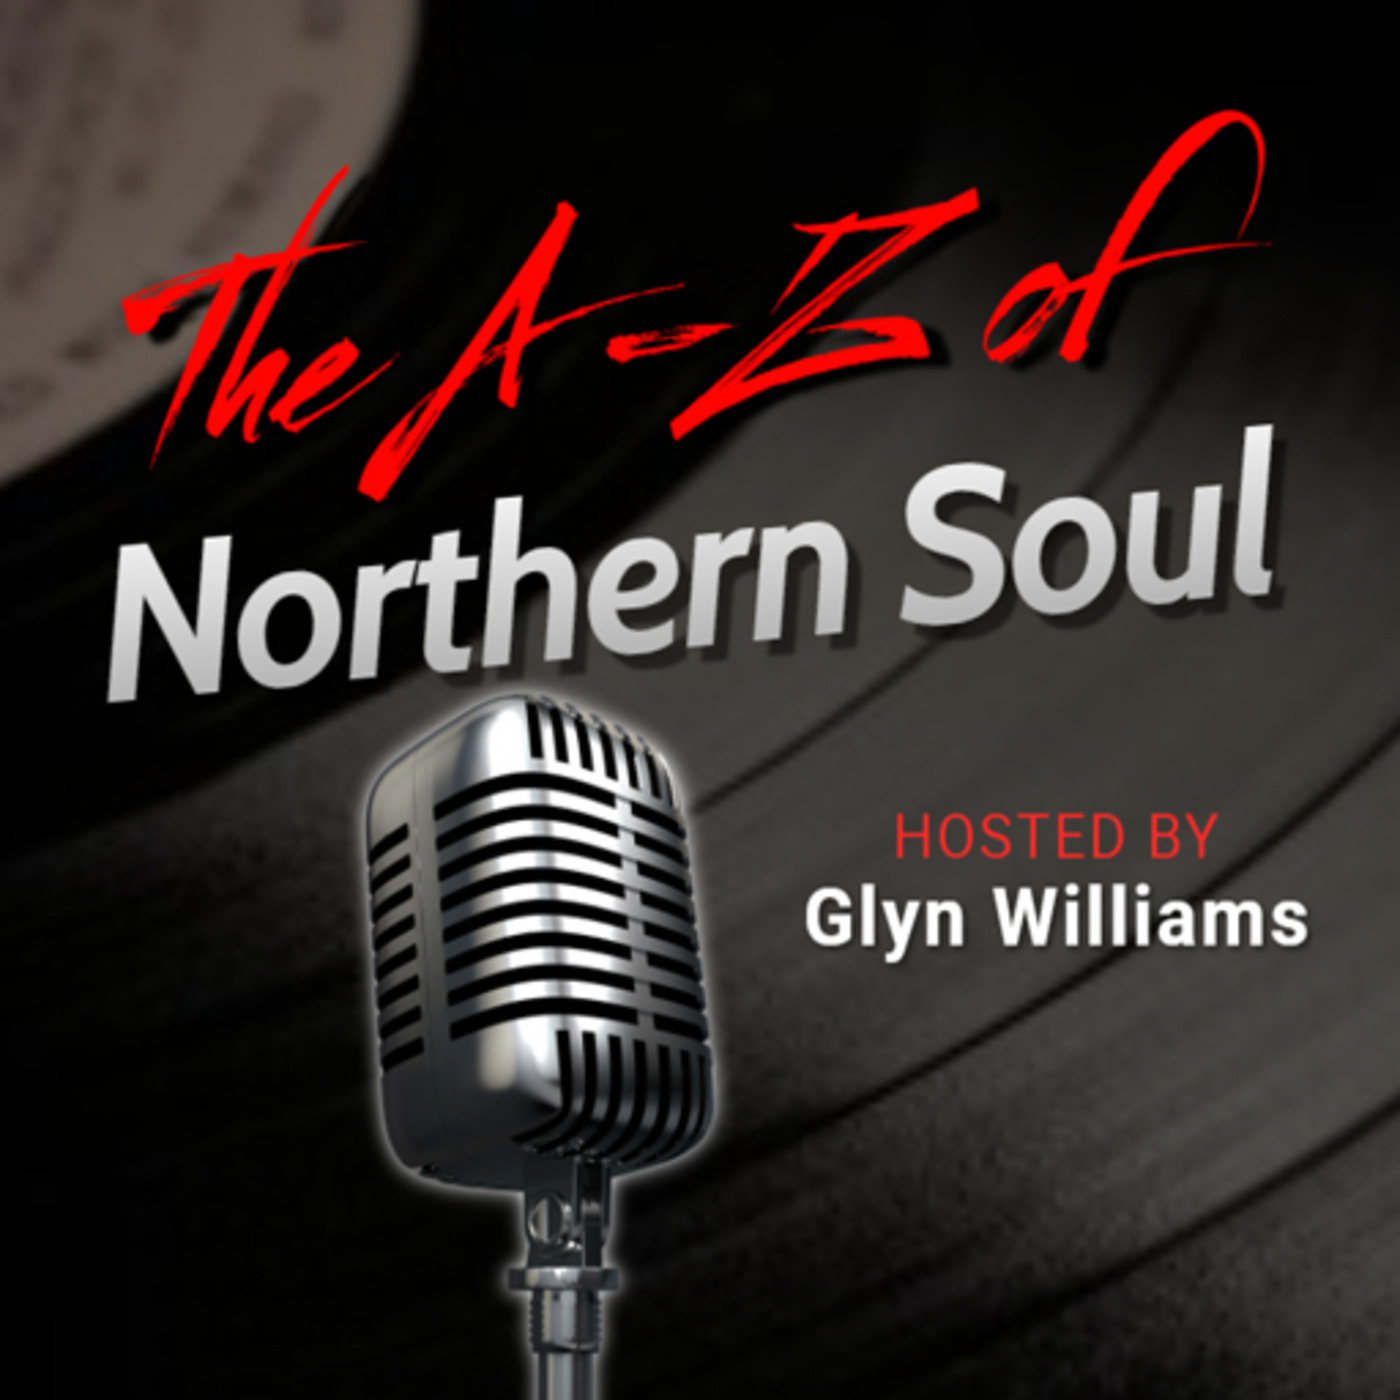 The A-Z of Northern Soul E075